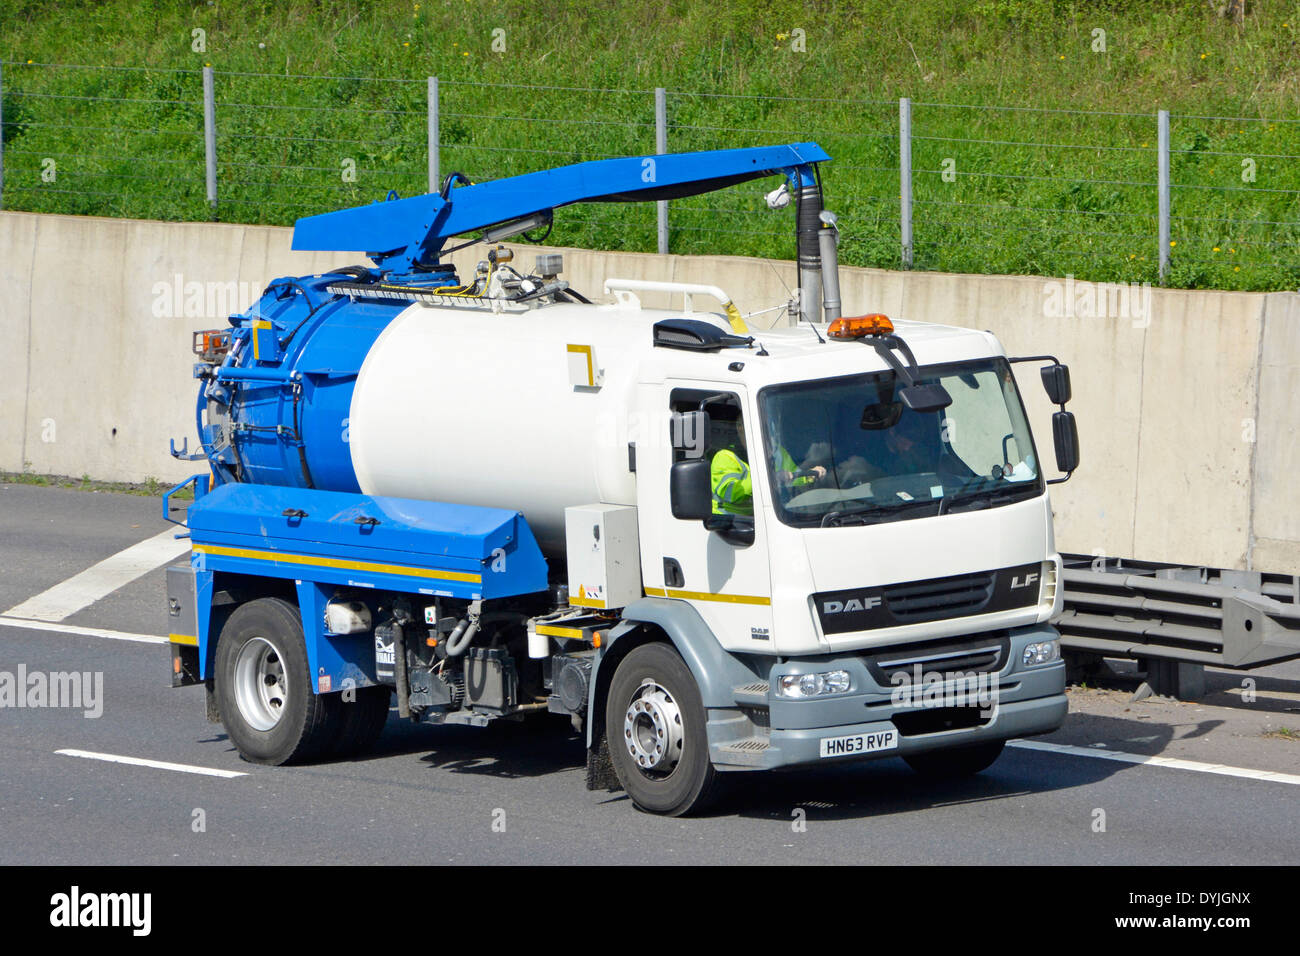 Driver of a clean blue and white DAF commercial vehicle road gully cleaning tanker lorry truck driving along M25 UK motorway Essex England UK Stock Photo